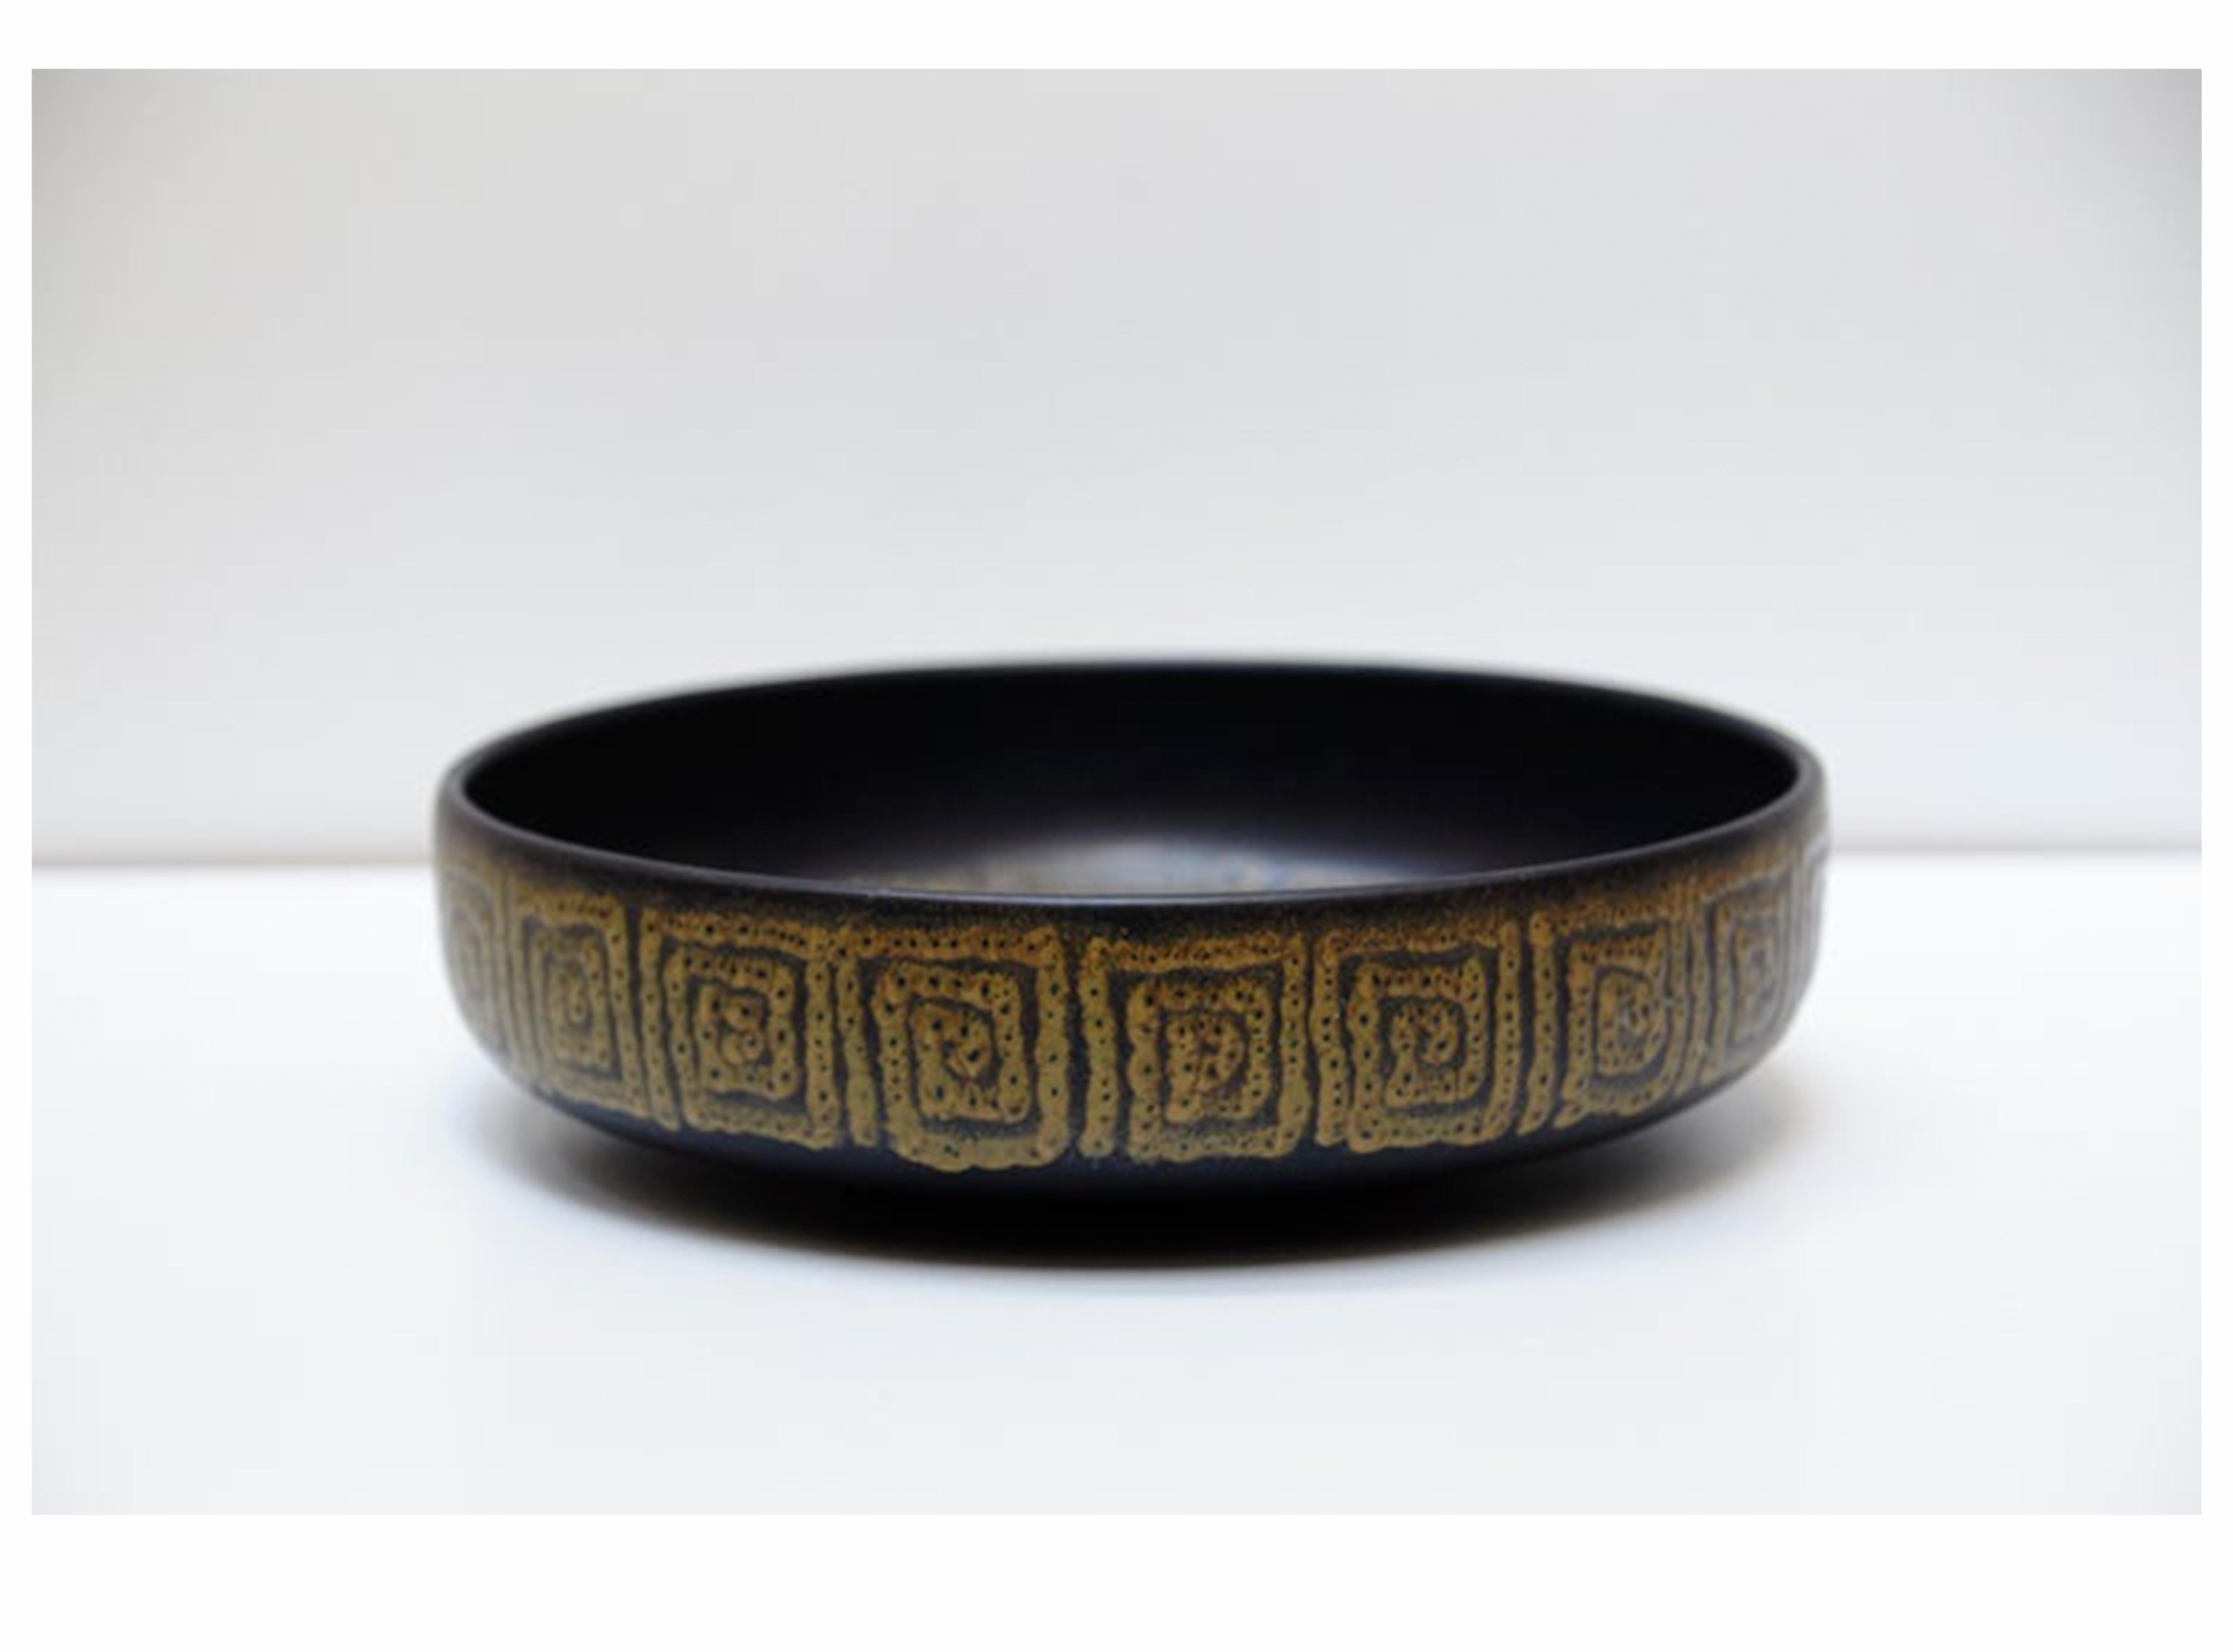 Ceramic center bowl by Serra from Spain, circa 1960.

In good original condition with minor wear consistent of age and use, preserving a beautiful patina.